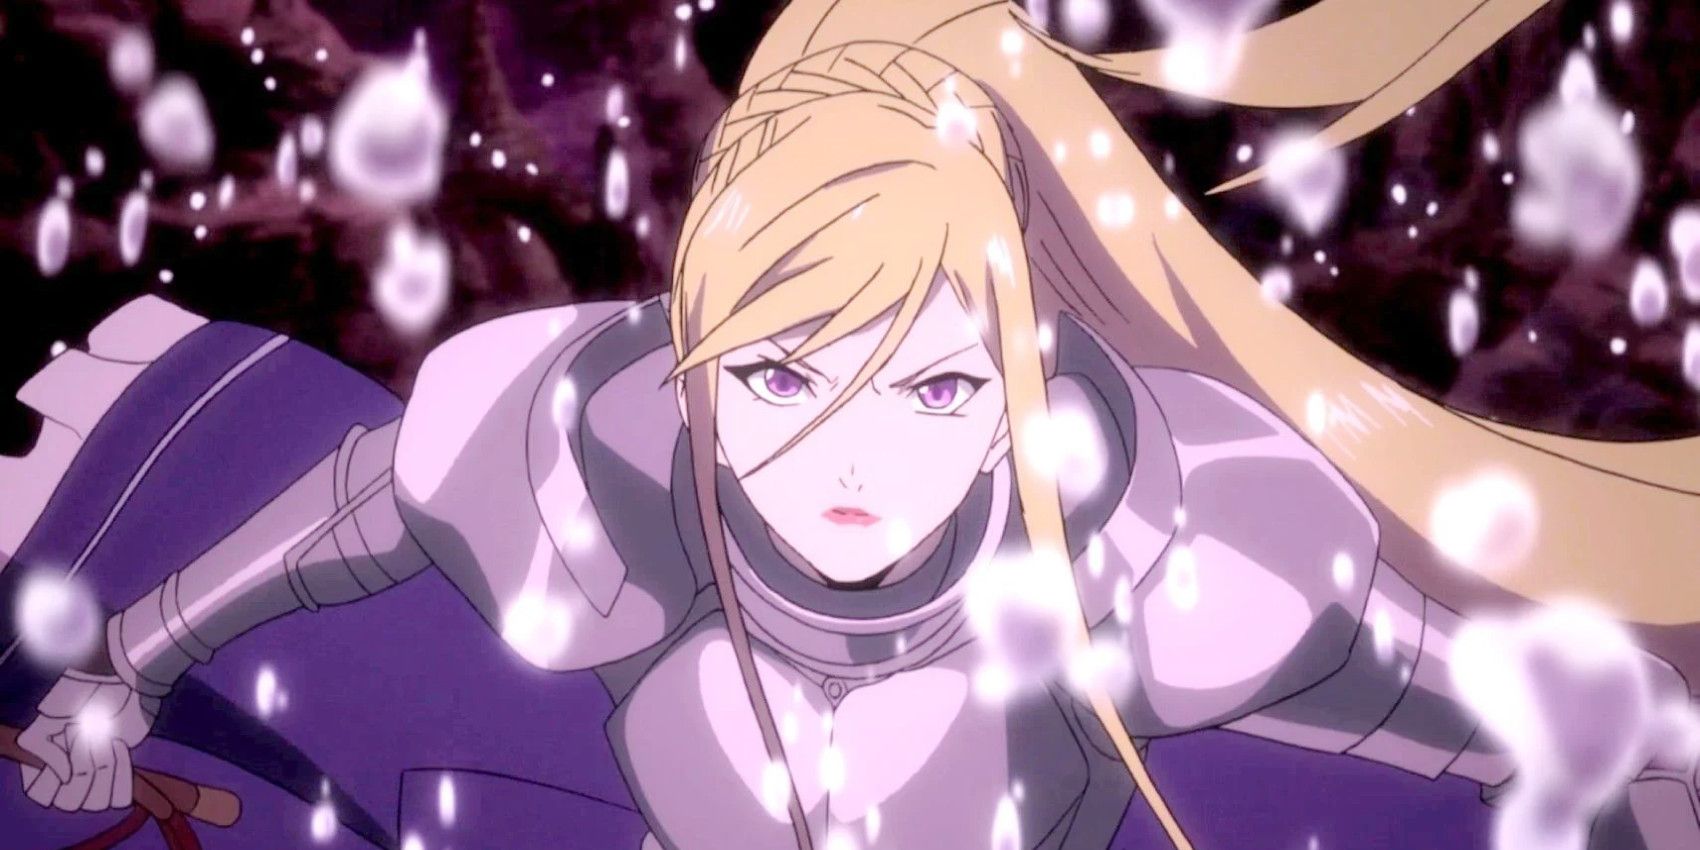 Bishamon stands ready for battle in Noragami